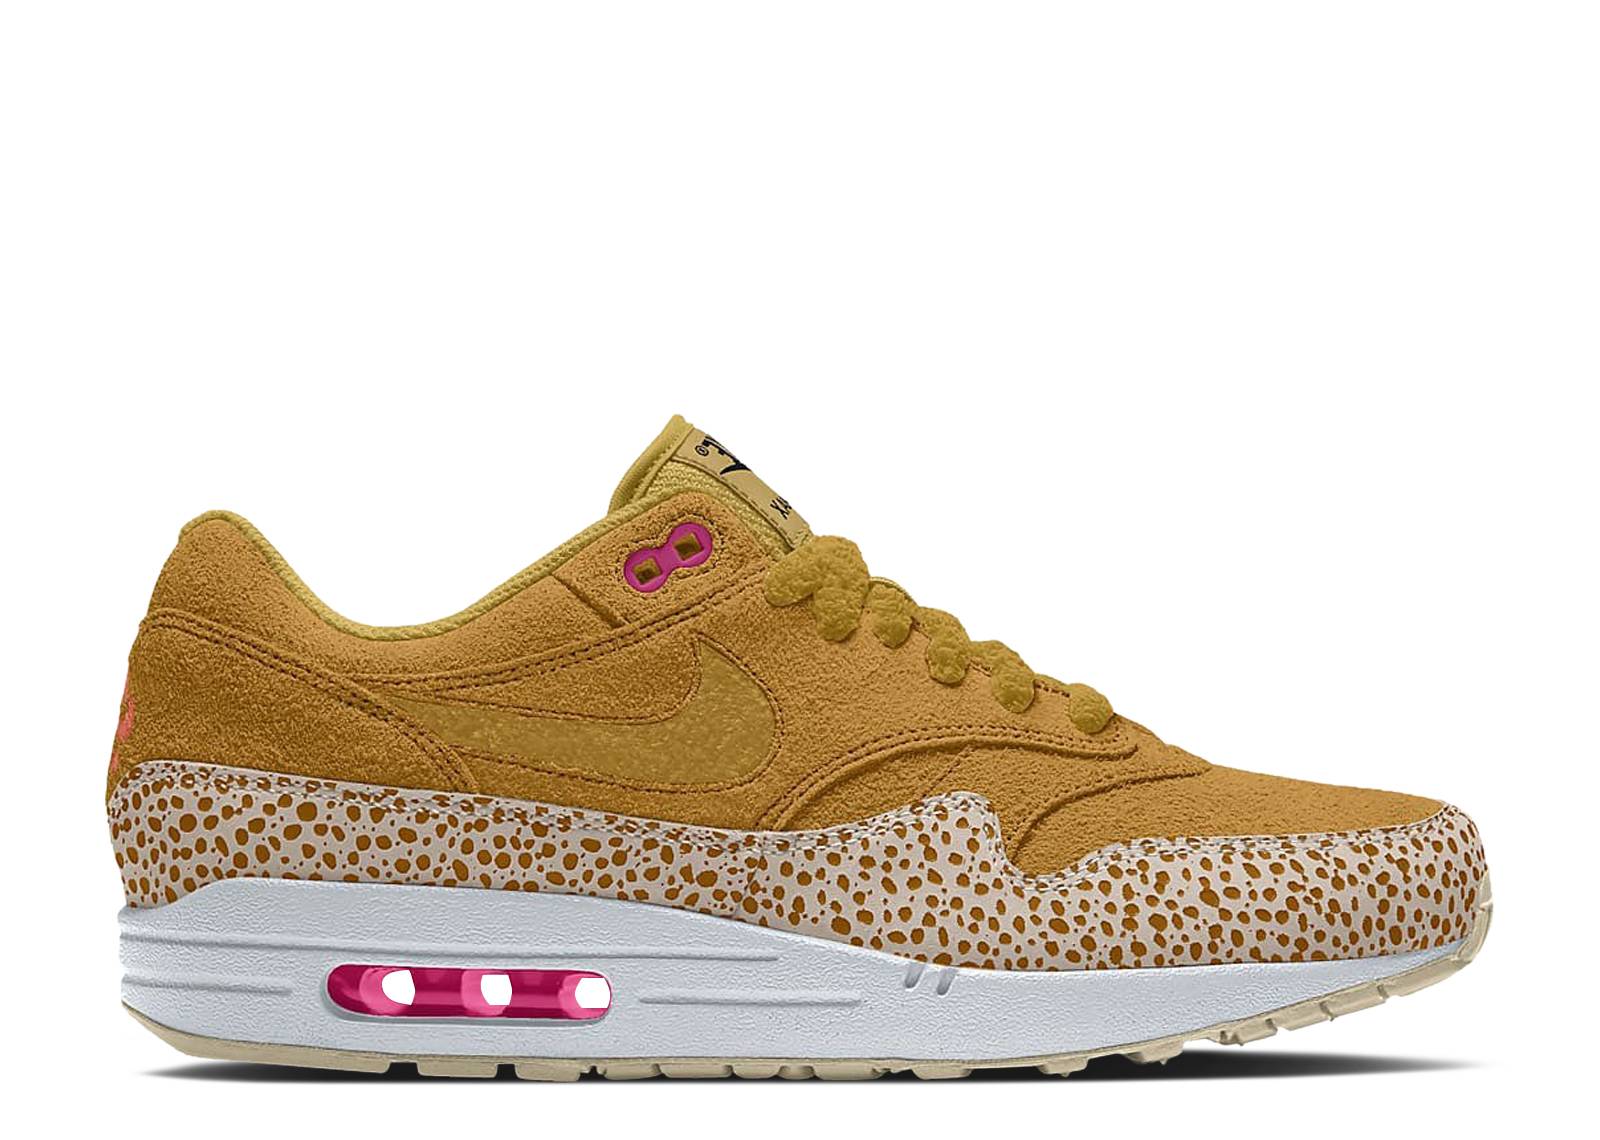 Air Max 1 'Safari Suede' Unlocked By You